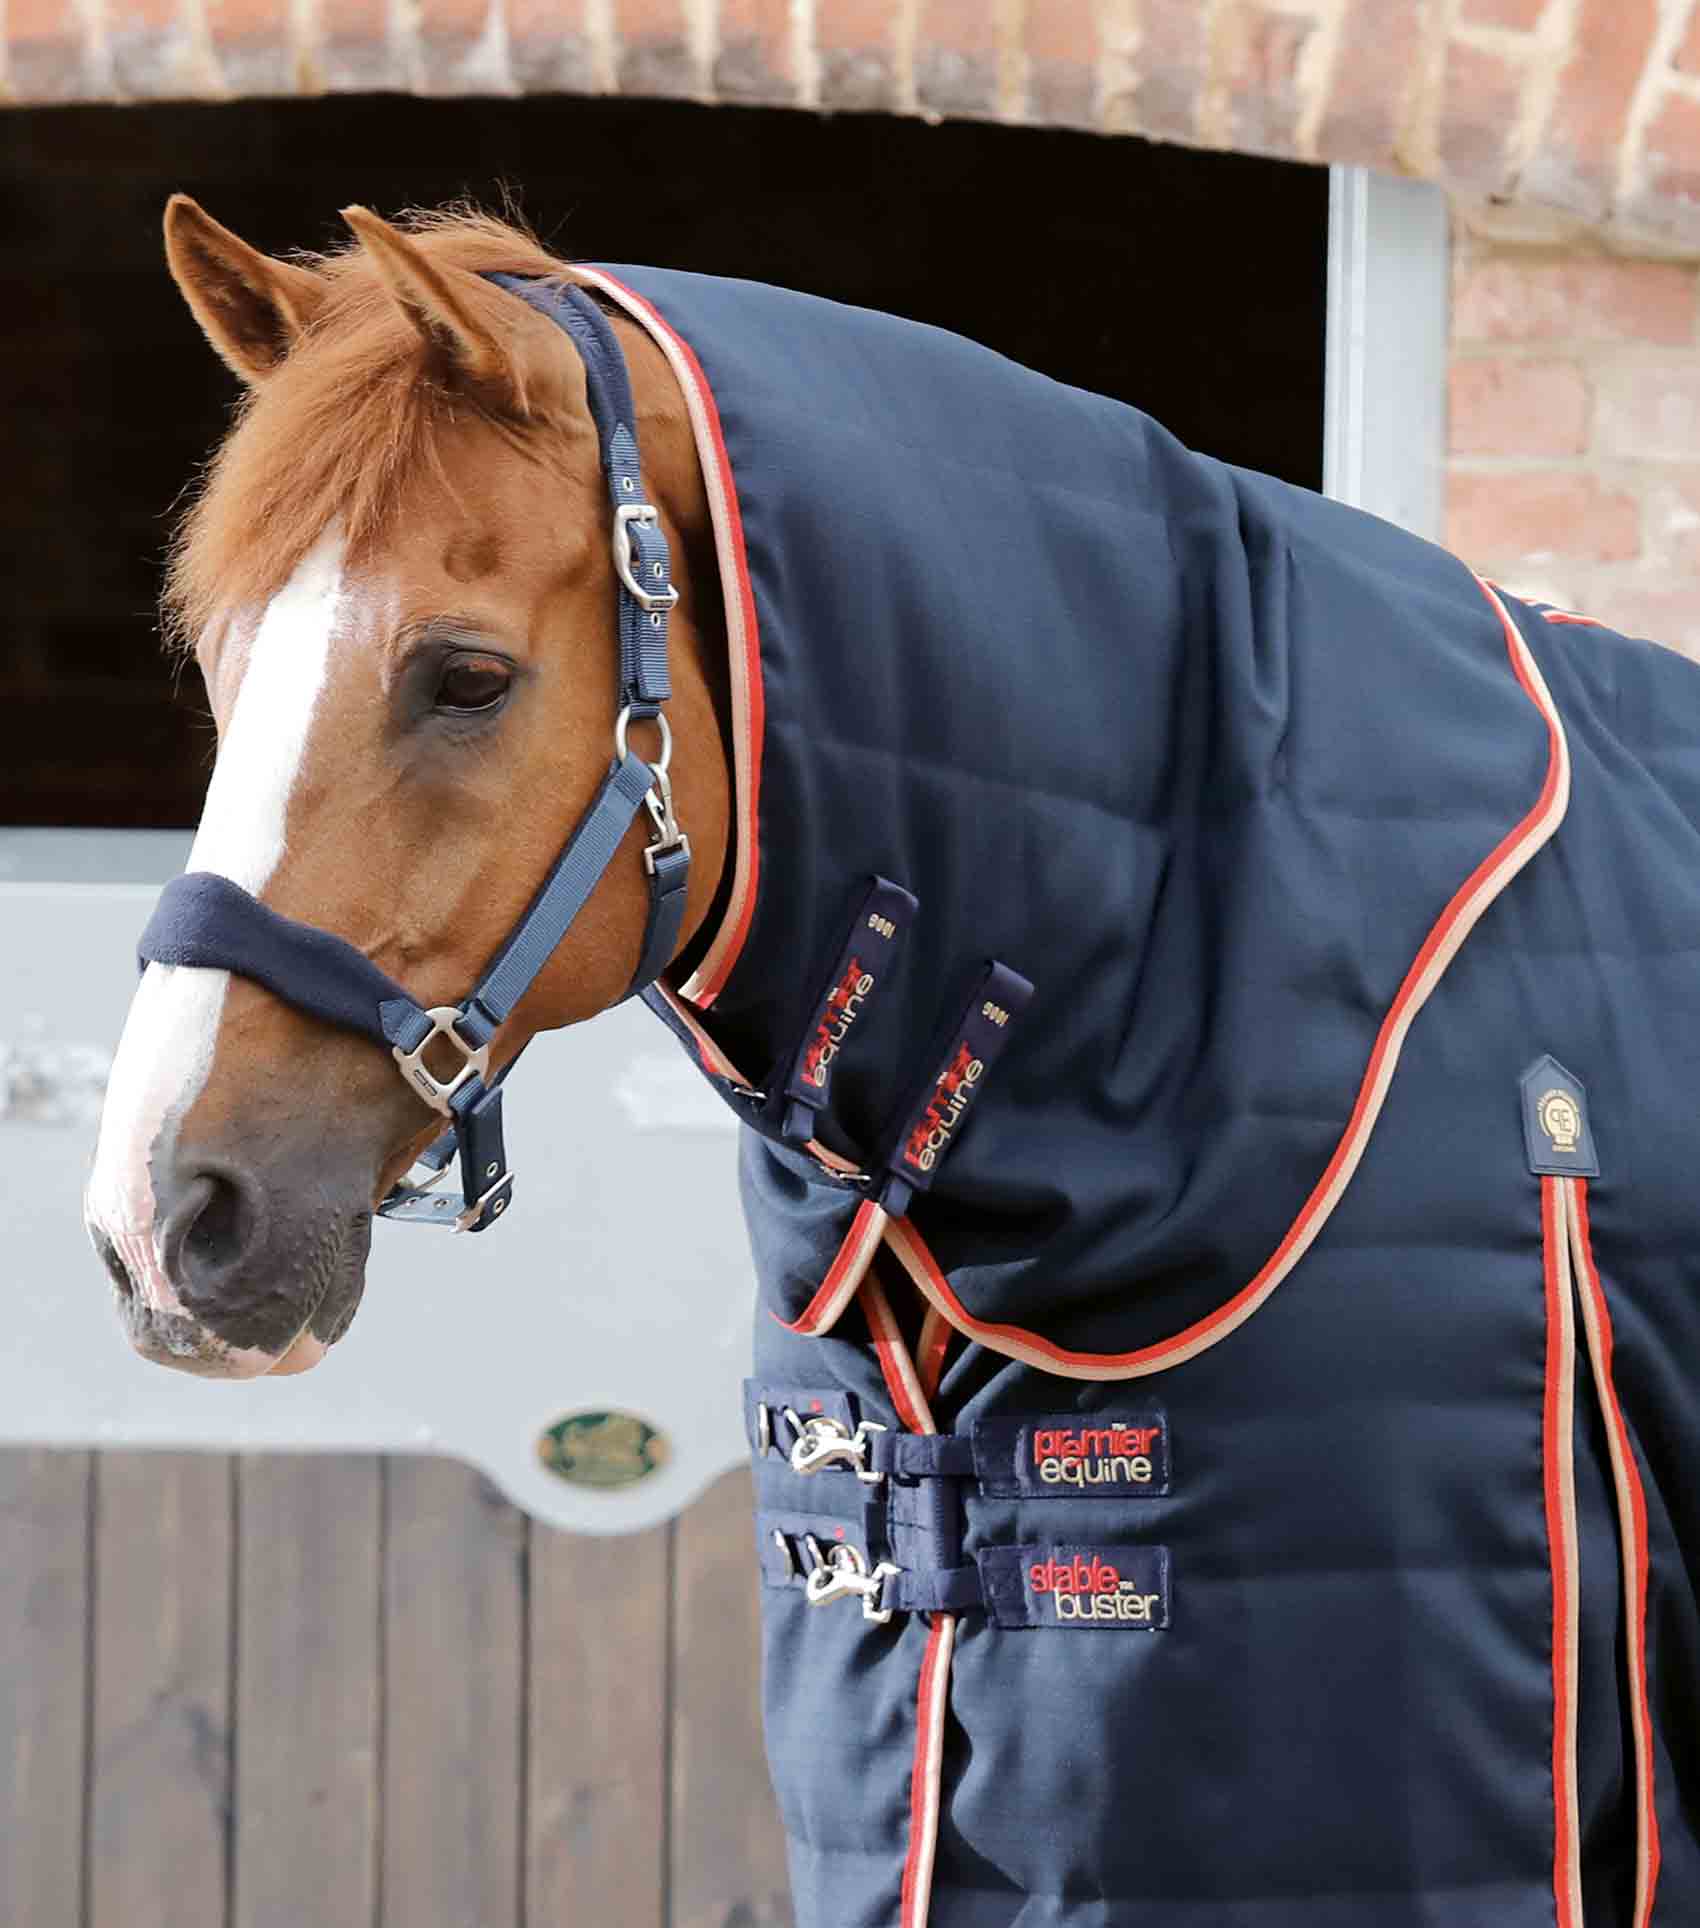 Description:Stable Buster 100 Stable Rug Neck Cover (100g Fill)